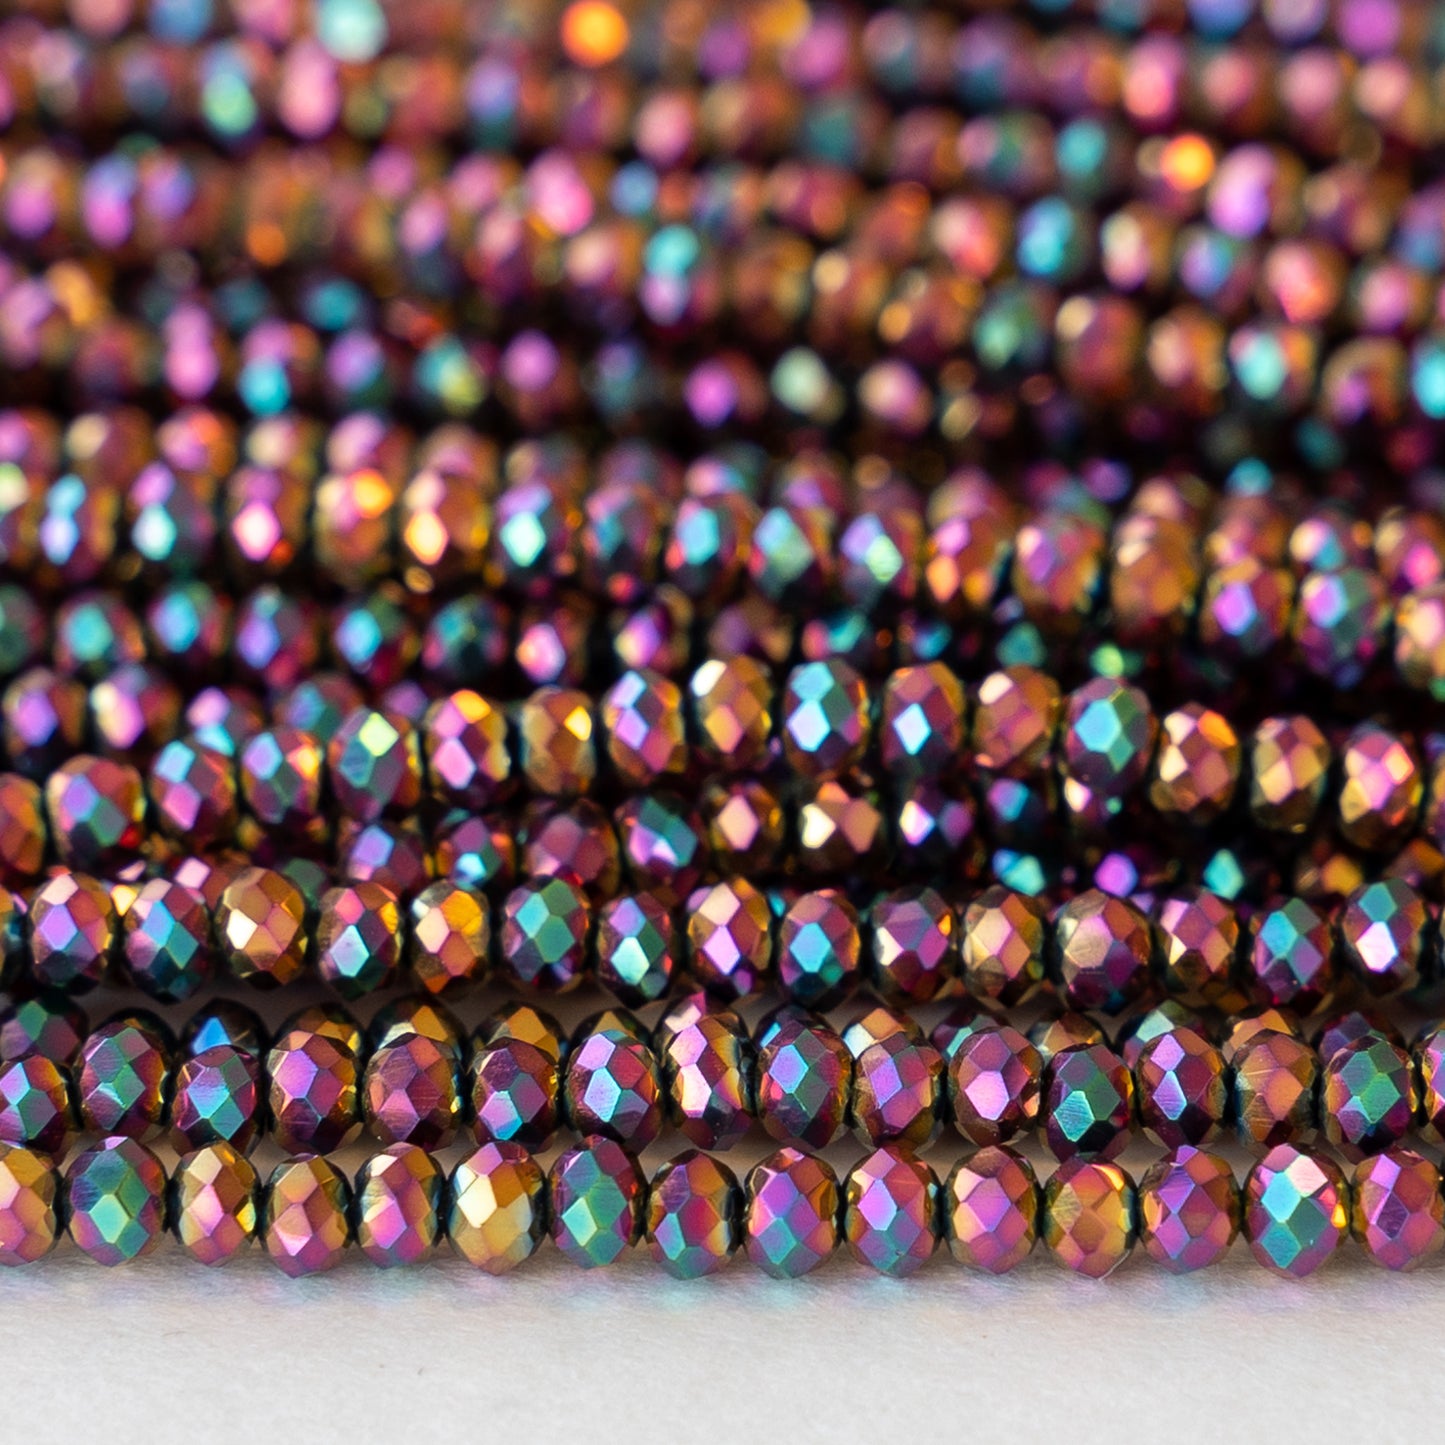 ANCADN 16mm Acrylic Beads Rainbow Beads Colorful Beads for Spring Easter DIY Jewelry Making (pinkblue)